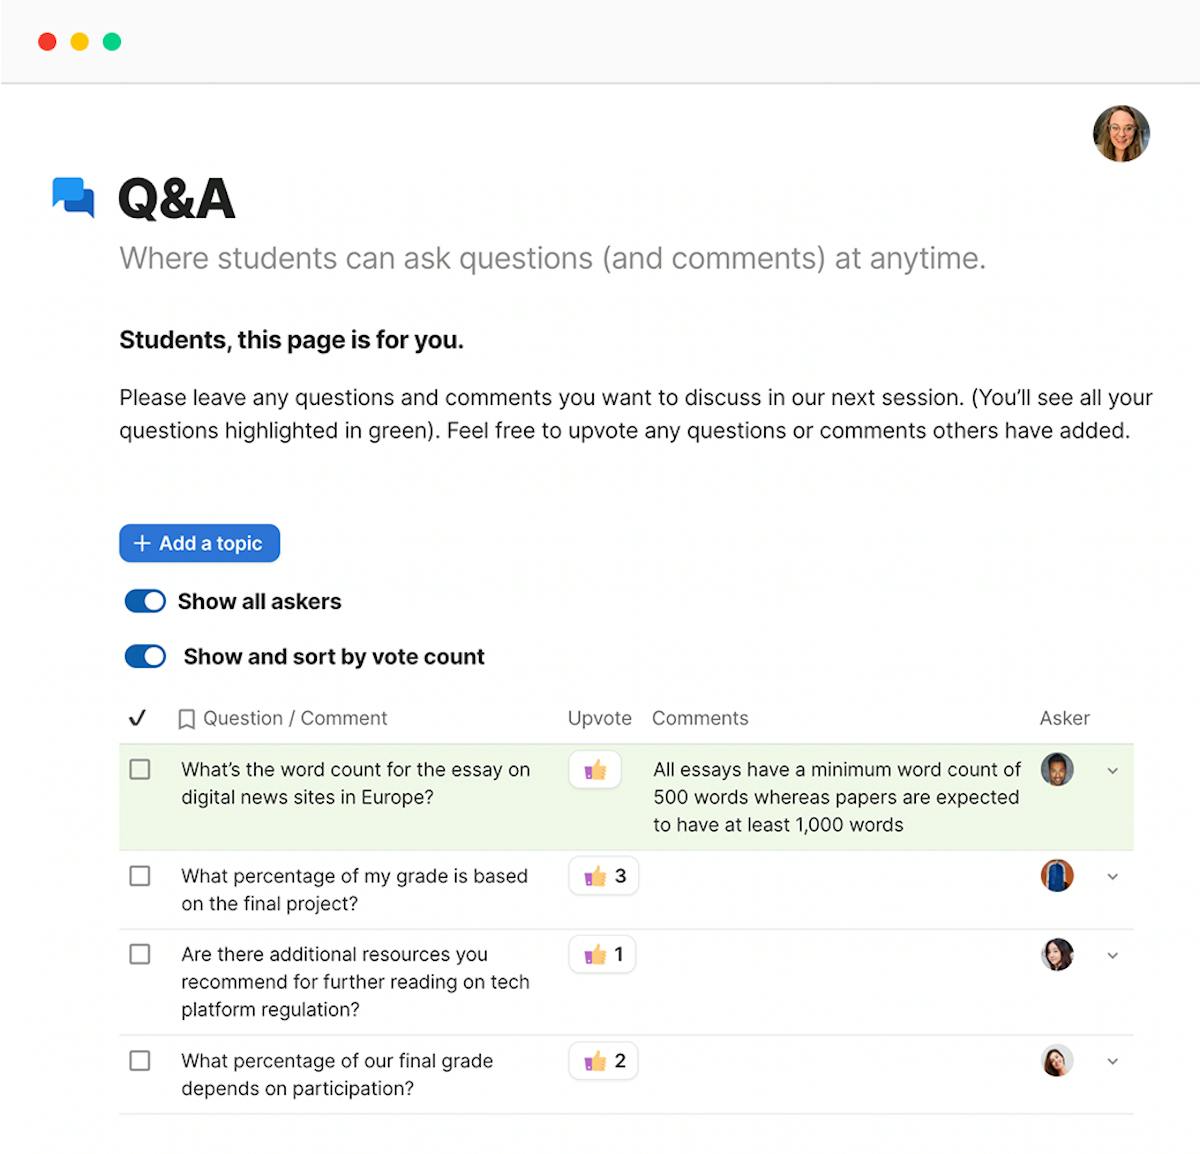 Interactive Q&A built in Coda - enables students to ask questions, vote on the questions they want answered, and get answers async.